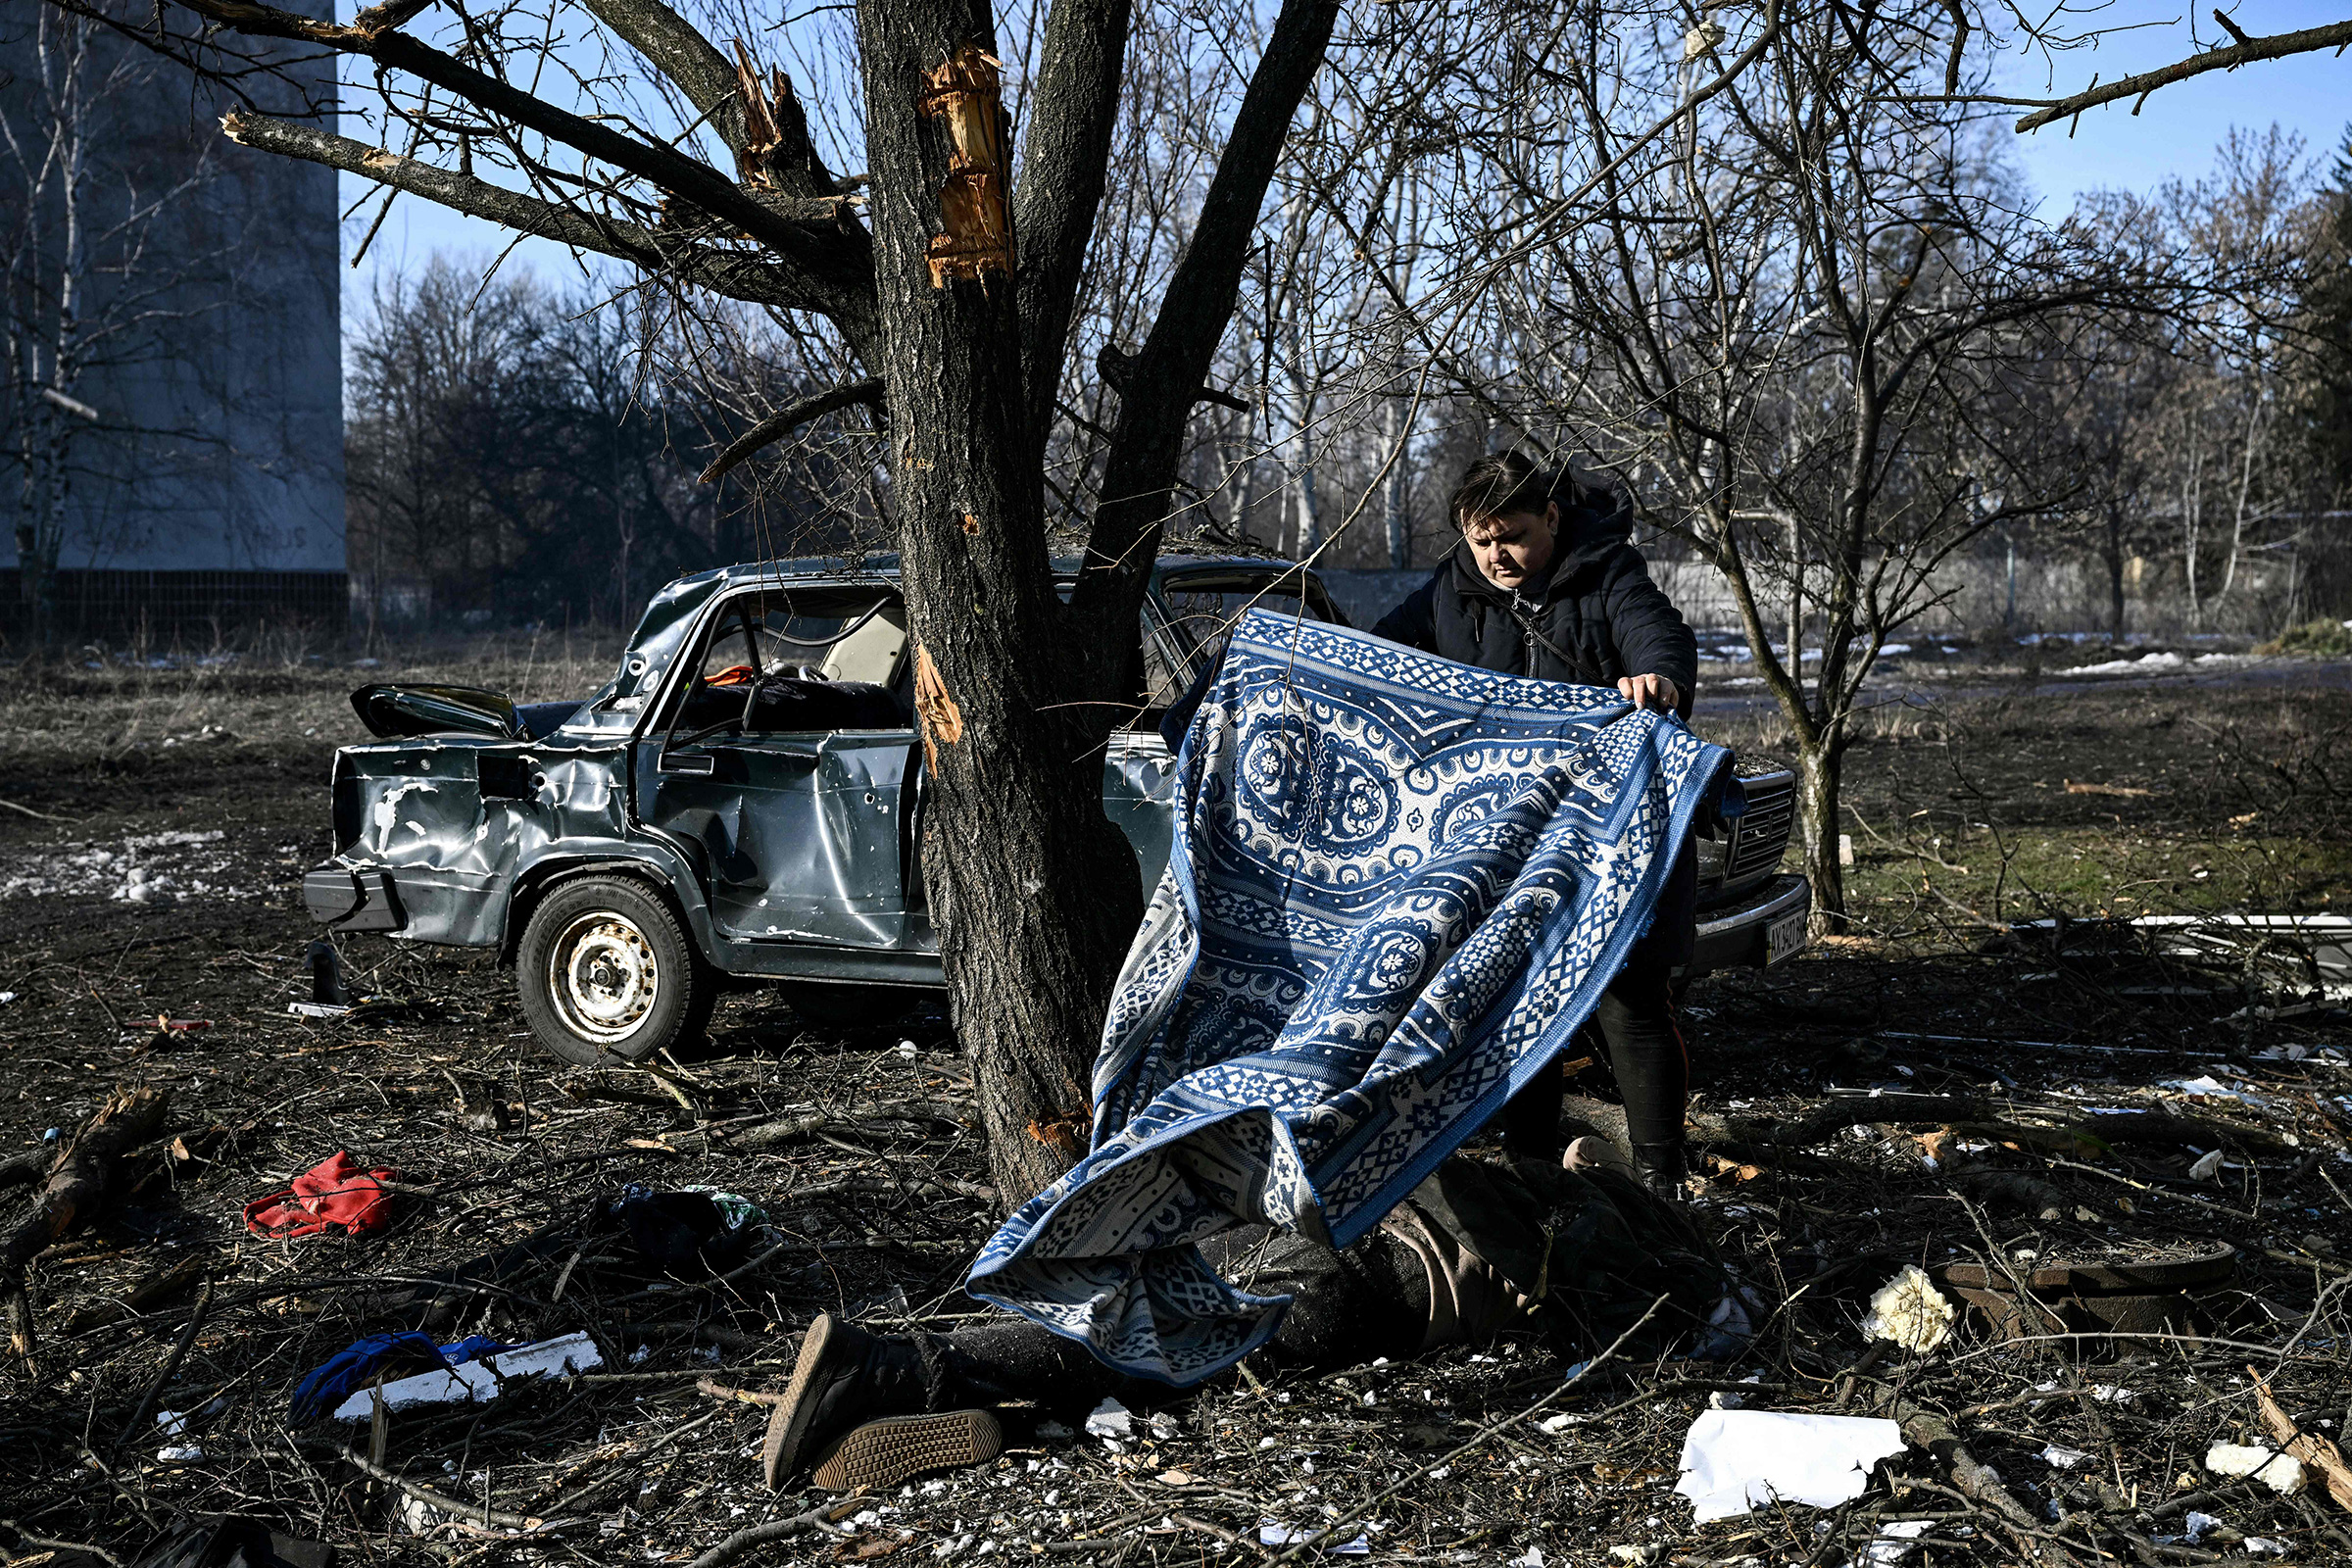 A man uses a carpet to cover a body on the ground after bombings on the eastern Ukraine town of Chuguiv on Feb. 24. Russia's ground forces today crossed into Ukraine from several directions, Ukraine's border guard service said, hours after President Vladimir Putin announced the launch of a major offensive.